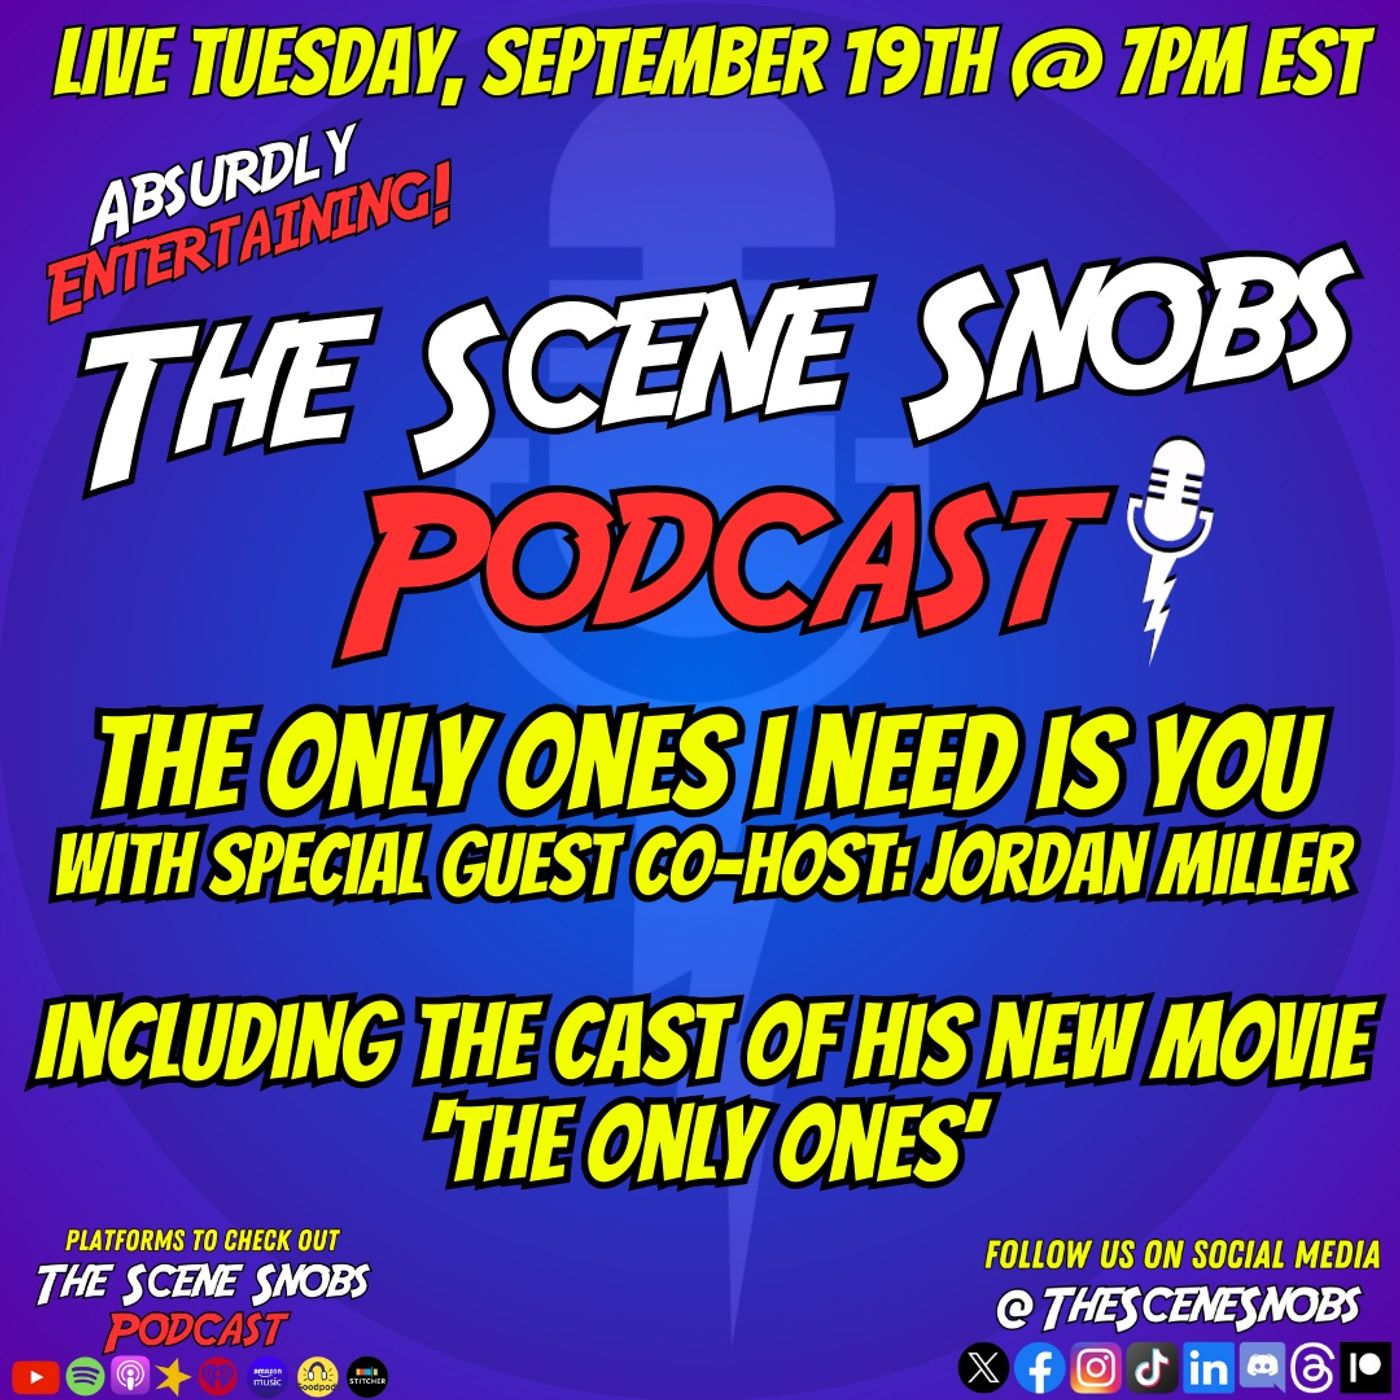 The Scene Snobs Podcast – The Only Ones I Need Is You